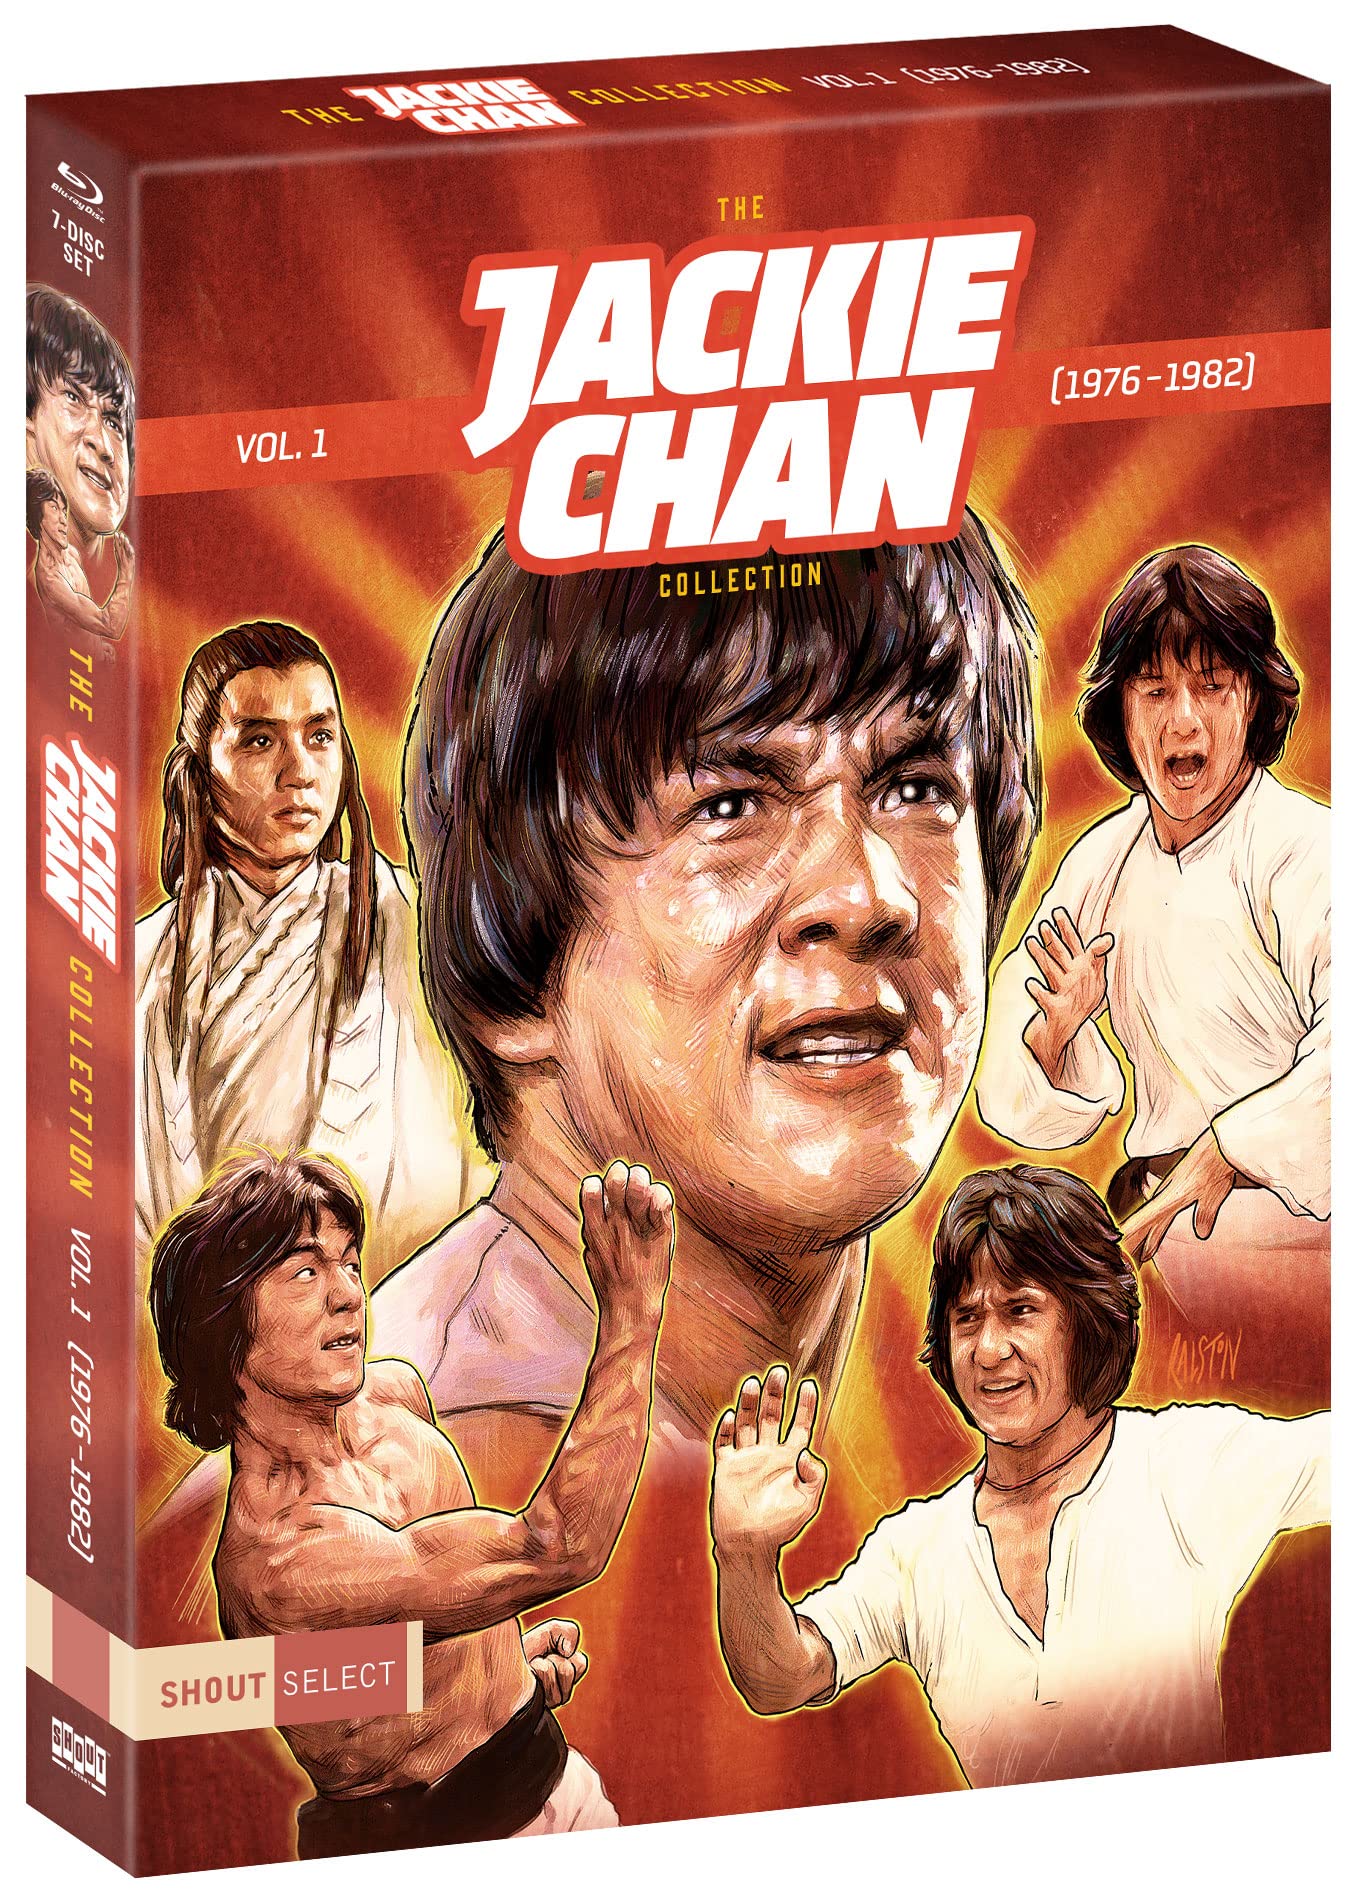 Amazon Prime Members Only - The Jackie Chan Collection: Volume 1 1976 - 1982 Blu-ray $54.99